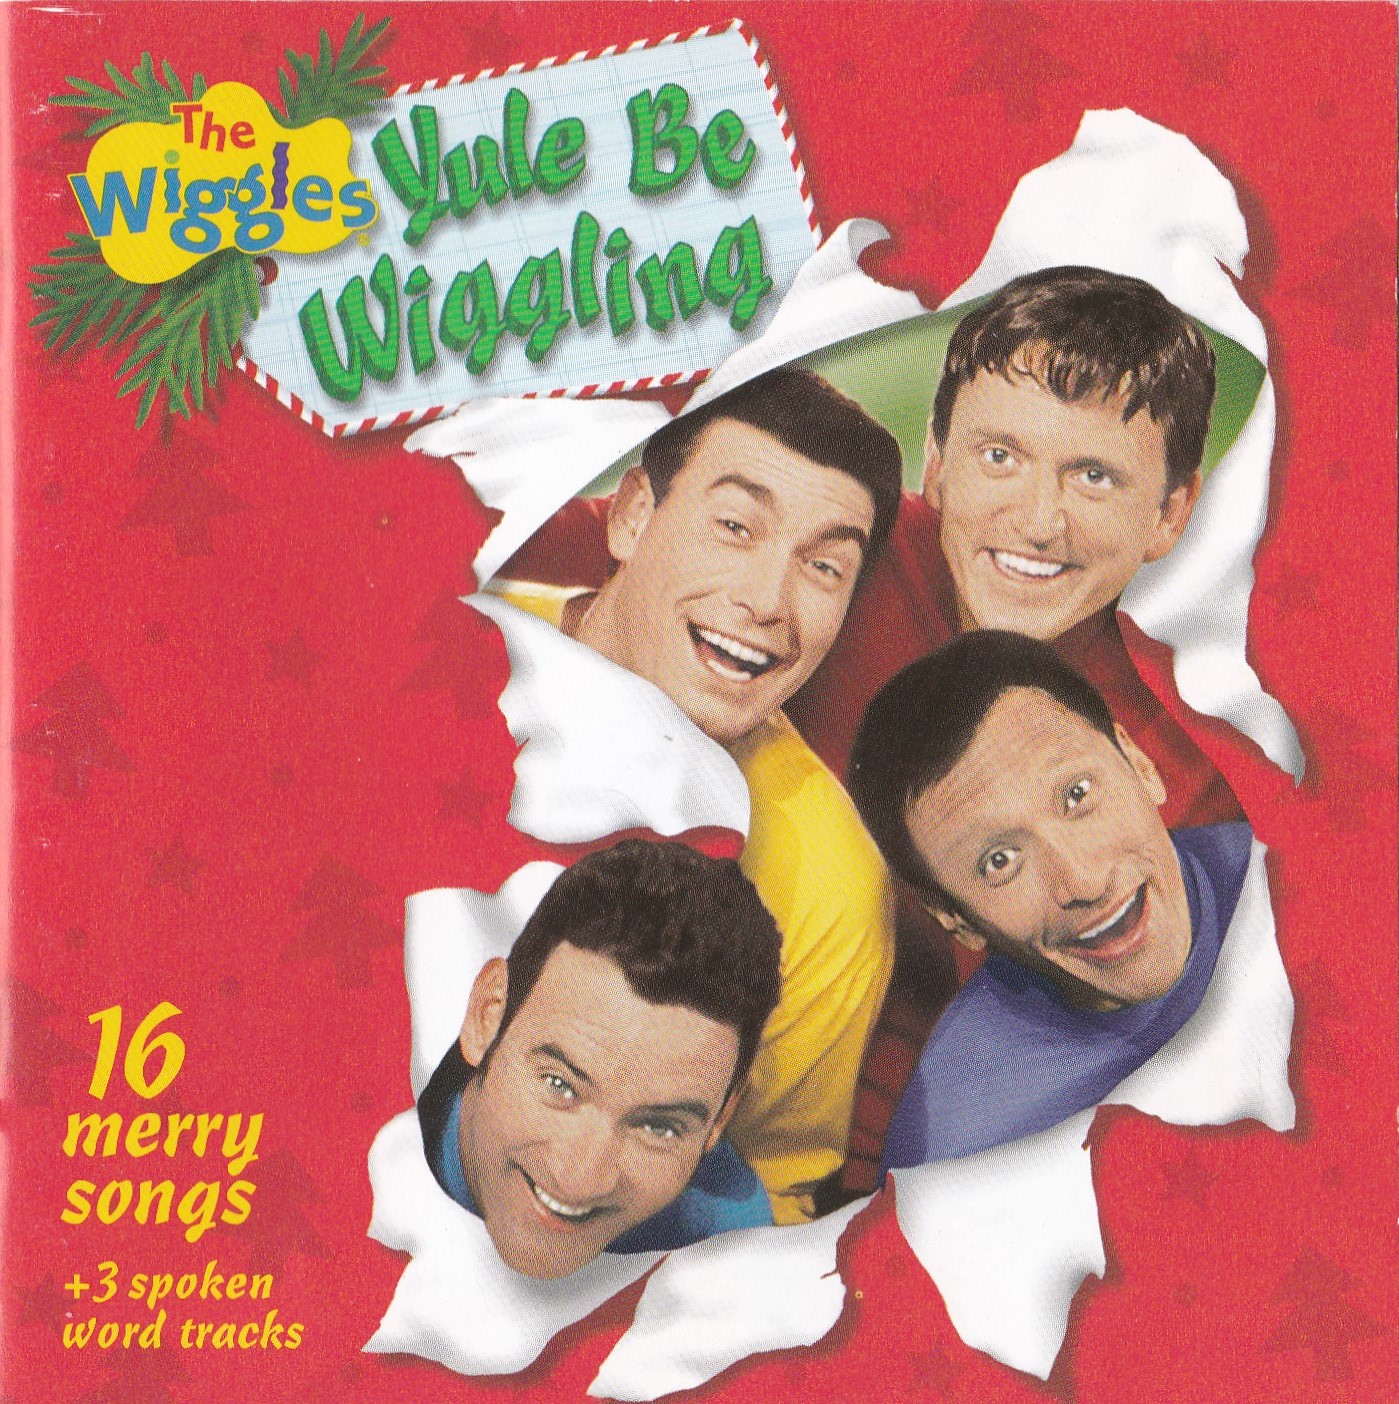 The Wiggles - Yule Be Wiggling [DVD] [Import]